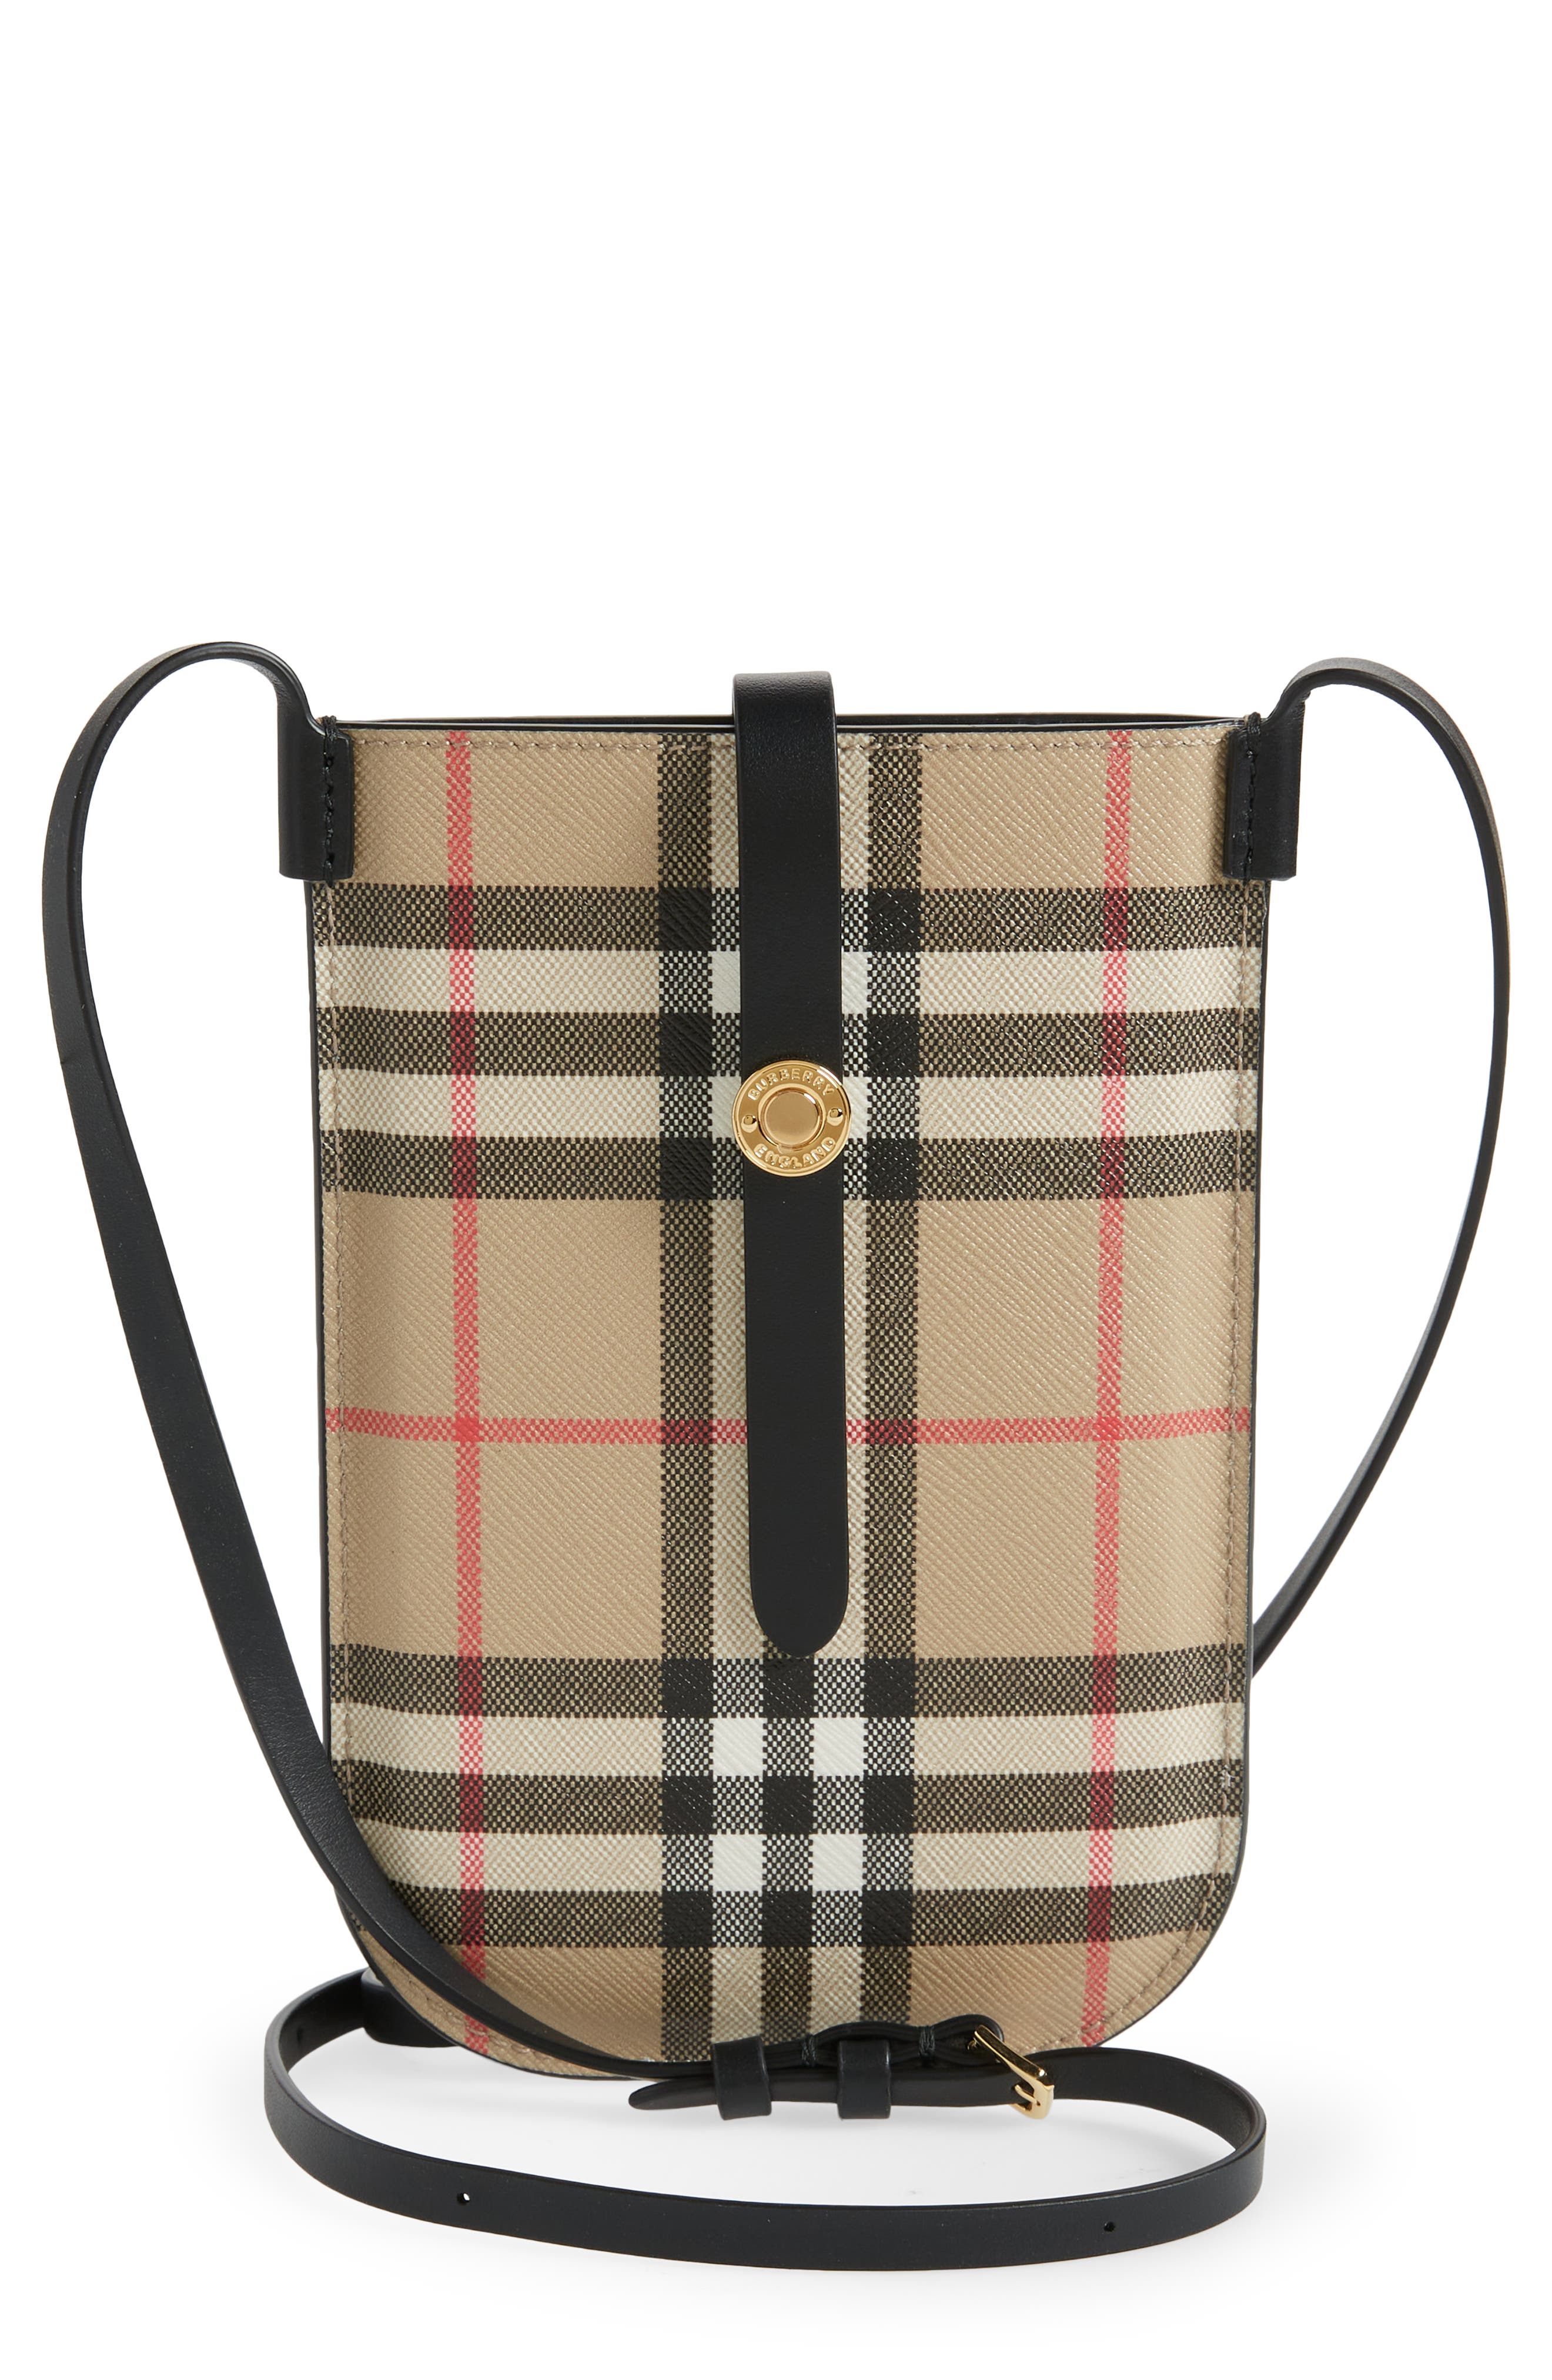 Burberry Anne Vintage Check E-Canvas Phone Crossbody Bag in Black/Beige Check at Nordstrom